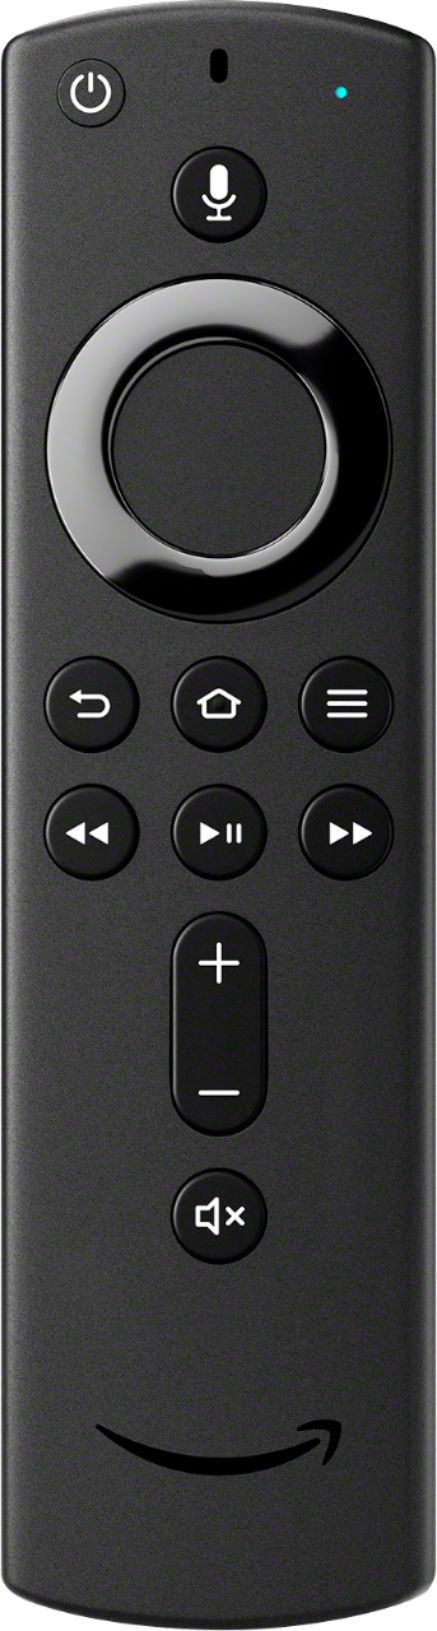 Best Buy:  All-New Alexa Voice Remote with Power and Volume Controls  B07B6L2QCF